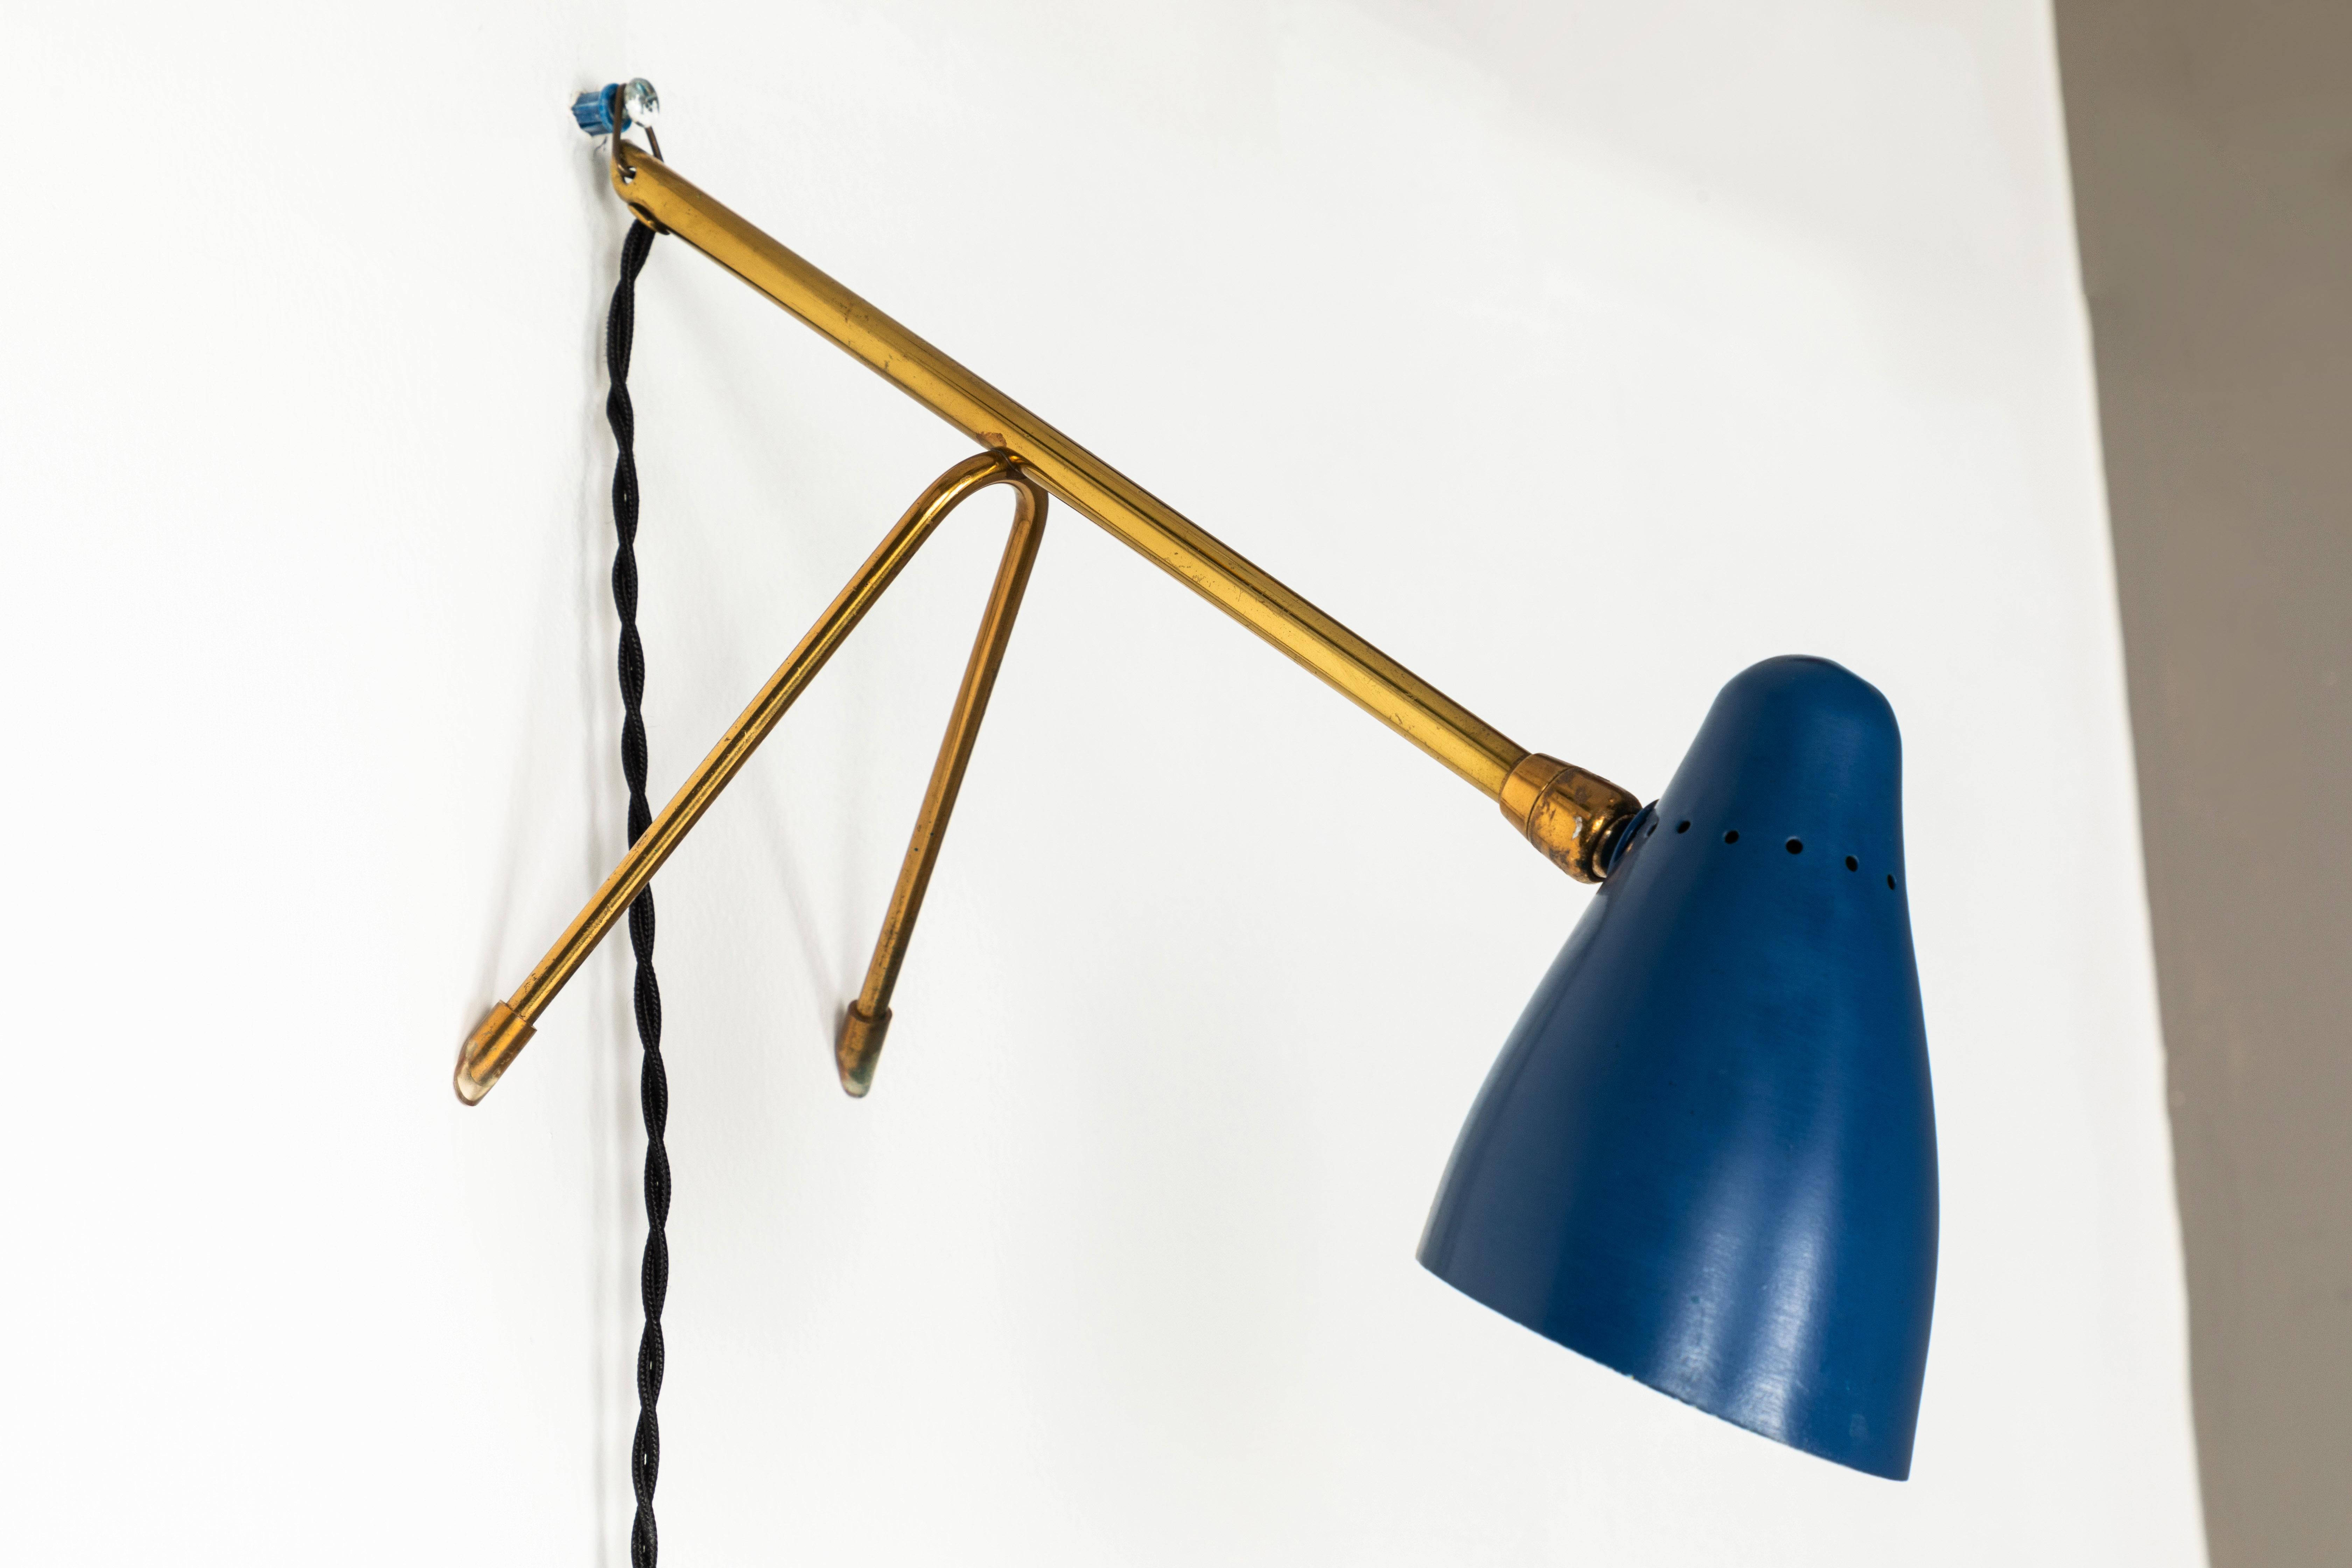 1950s Giuseppe Ostuni wall or table lamp for O-Luce . Executed in blue painted aluminum and brass. The shade sits on a brass ball joint giving it 360 degree tilting range for maximum adjustability. It also has a brass ring on the base for wall